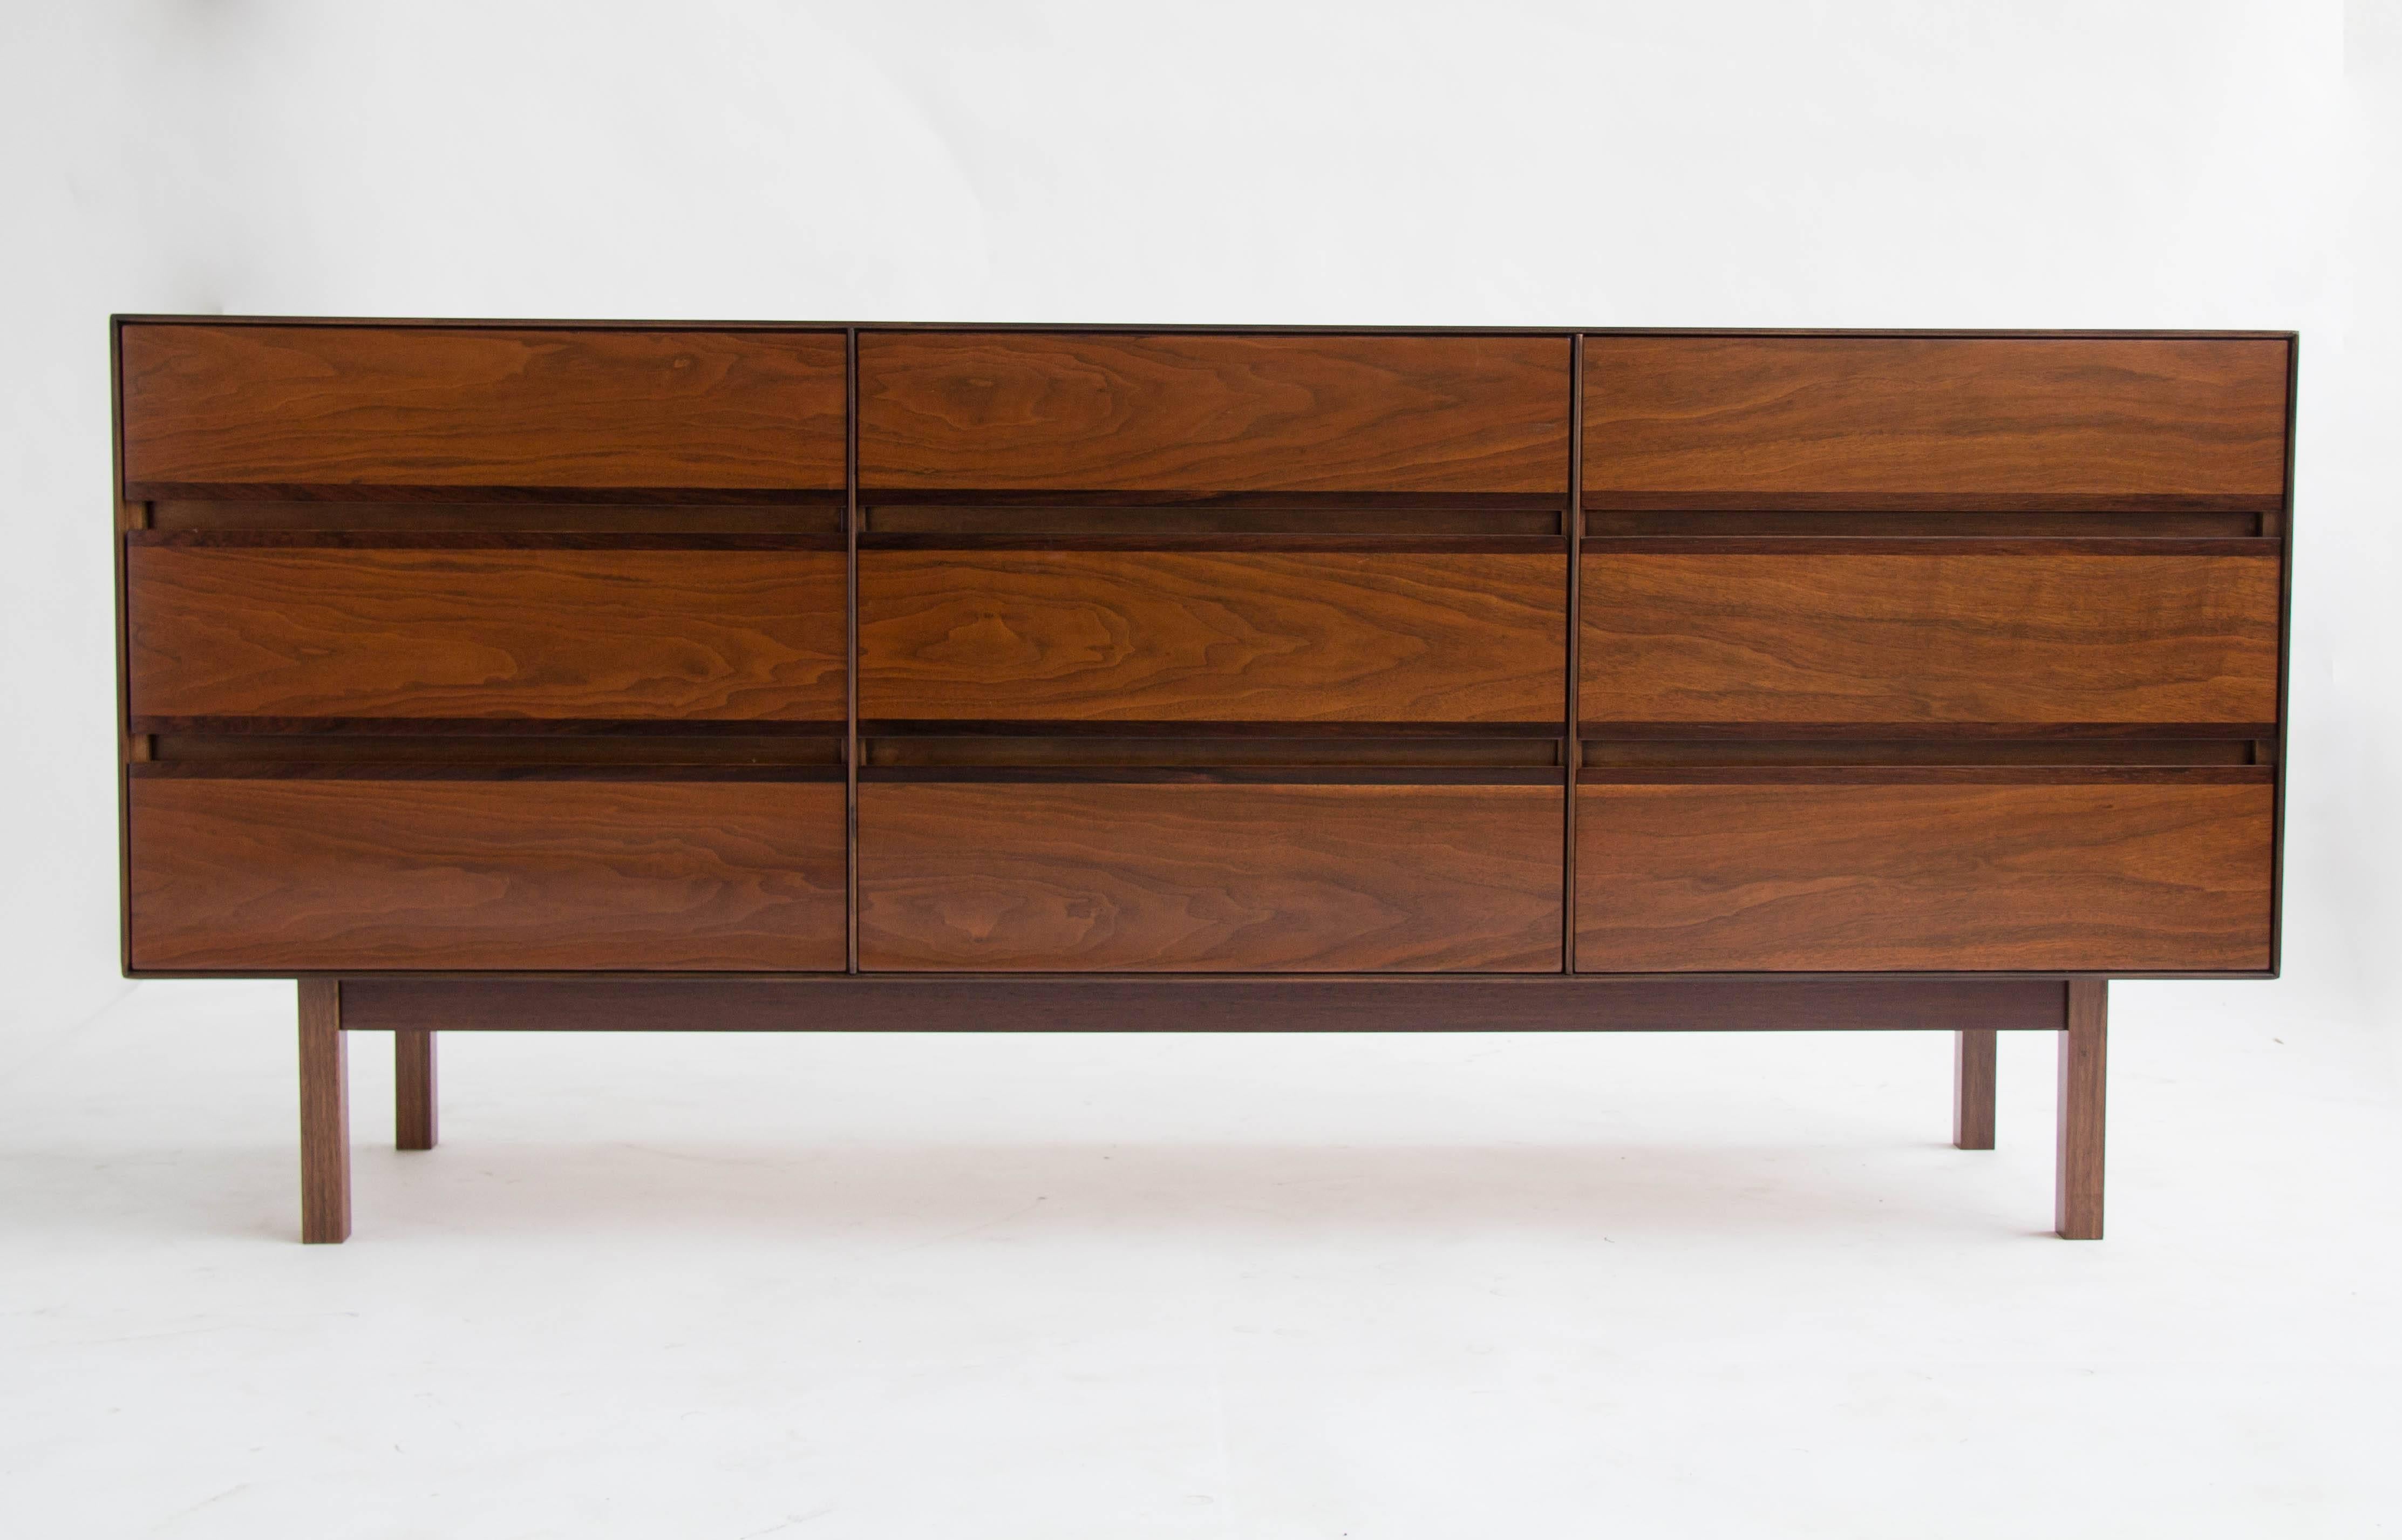 Deceptively minimal design by H. Paul Browning for Stanley’s “Royal American” collection has nine drawers in a walnut frame, resting on four recessed legs. The front panel of each drawer has a slim band of rosewood veneer. Drawer edges are sculpted